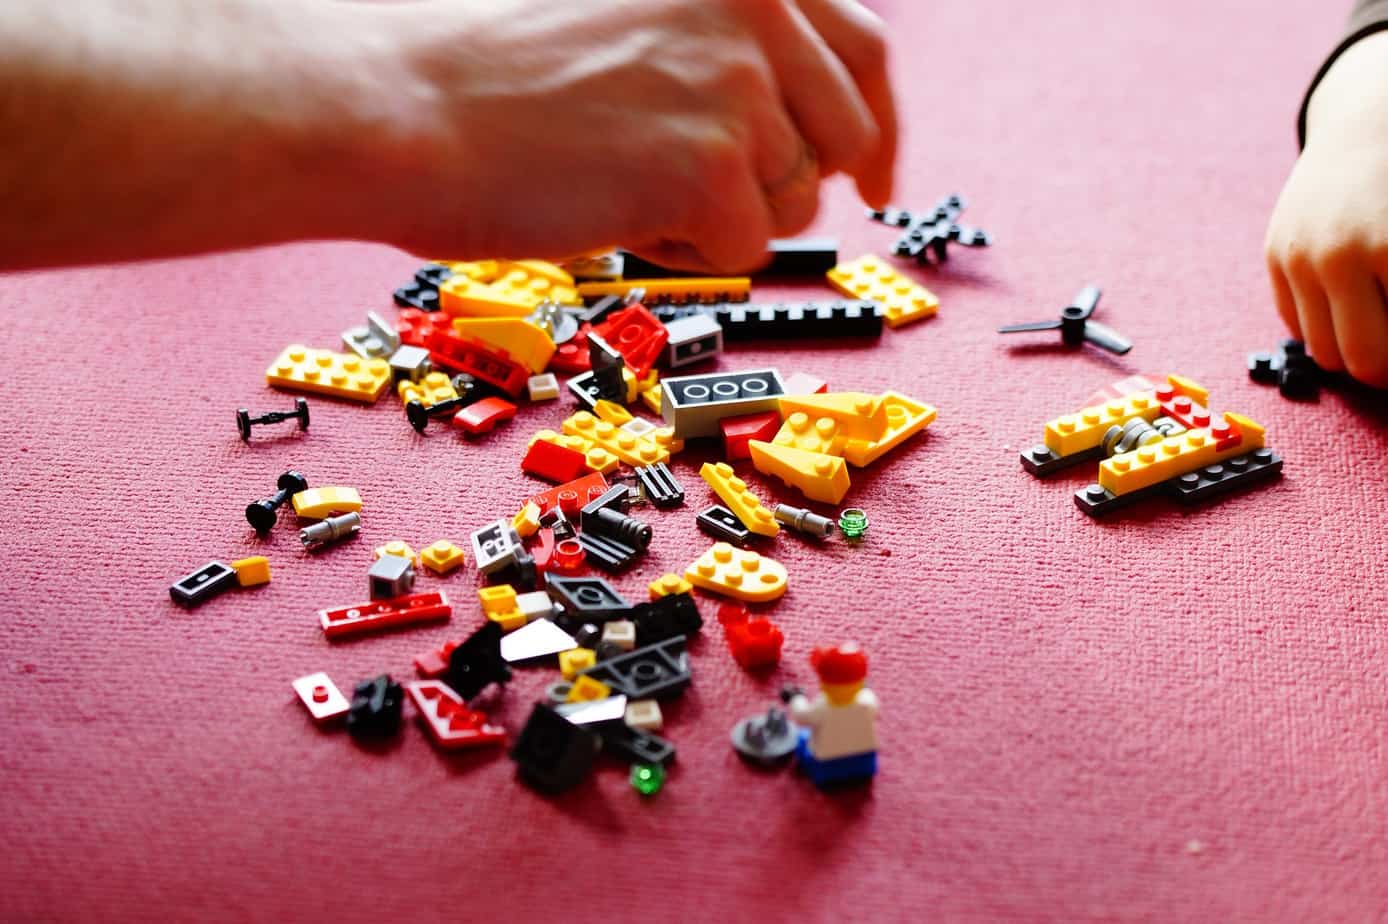 How To Make Your Own Building Block Toys